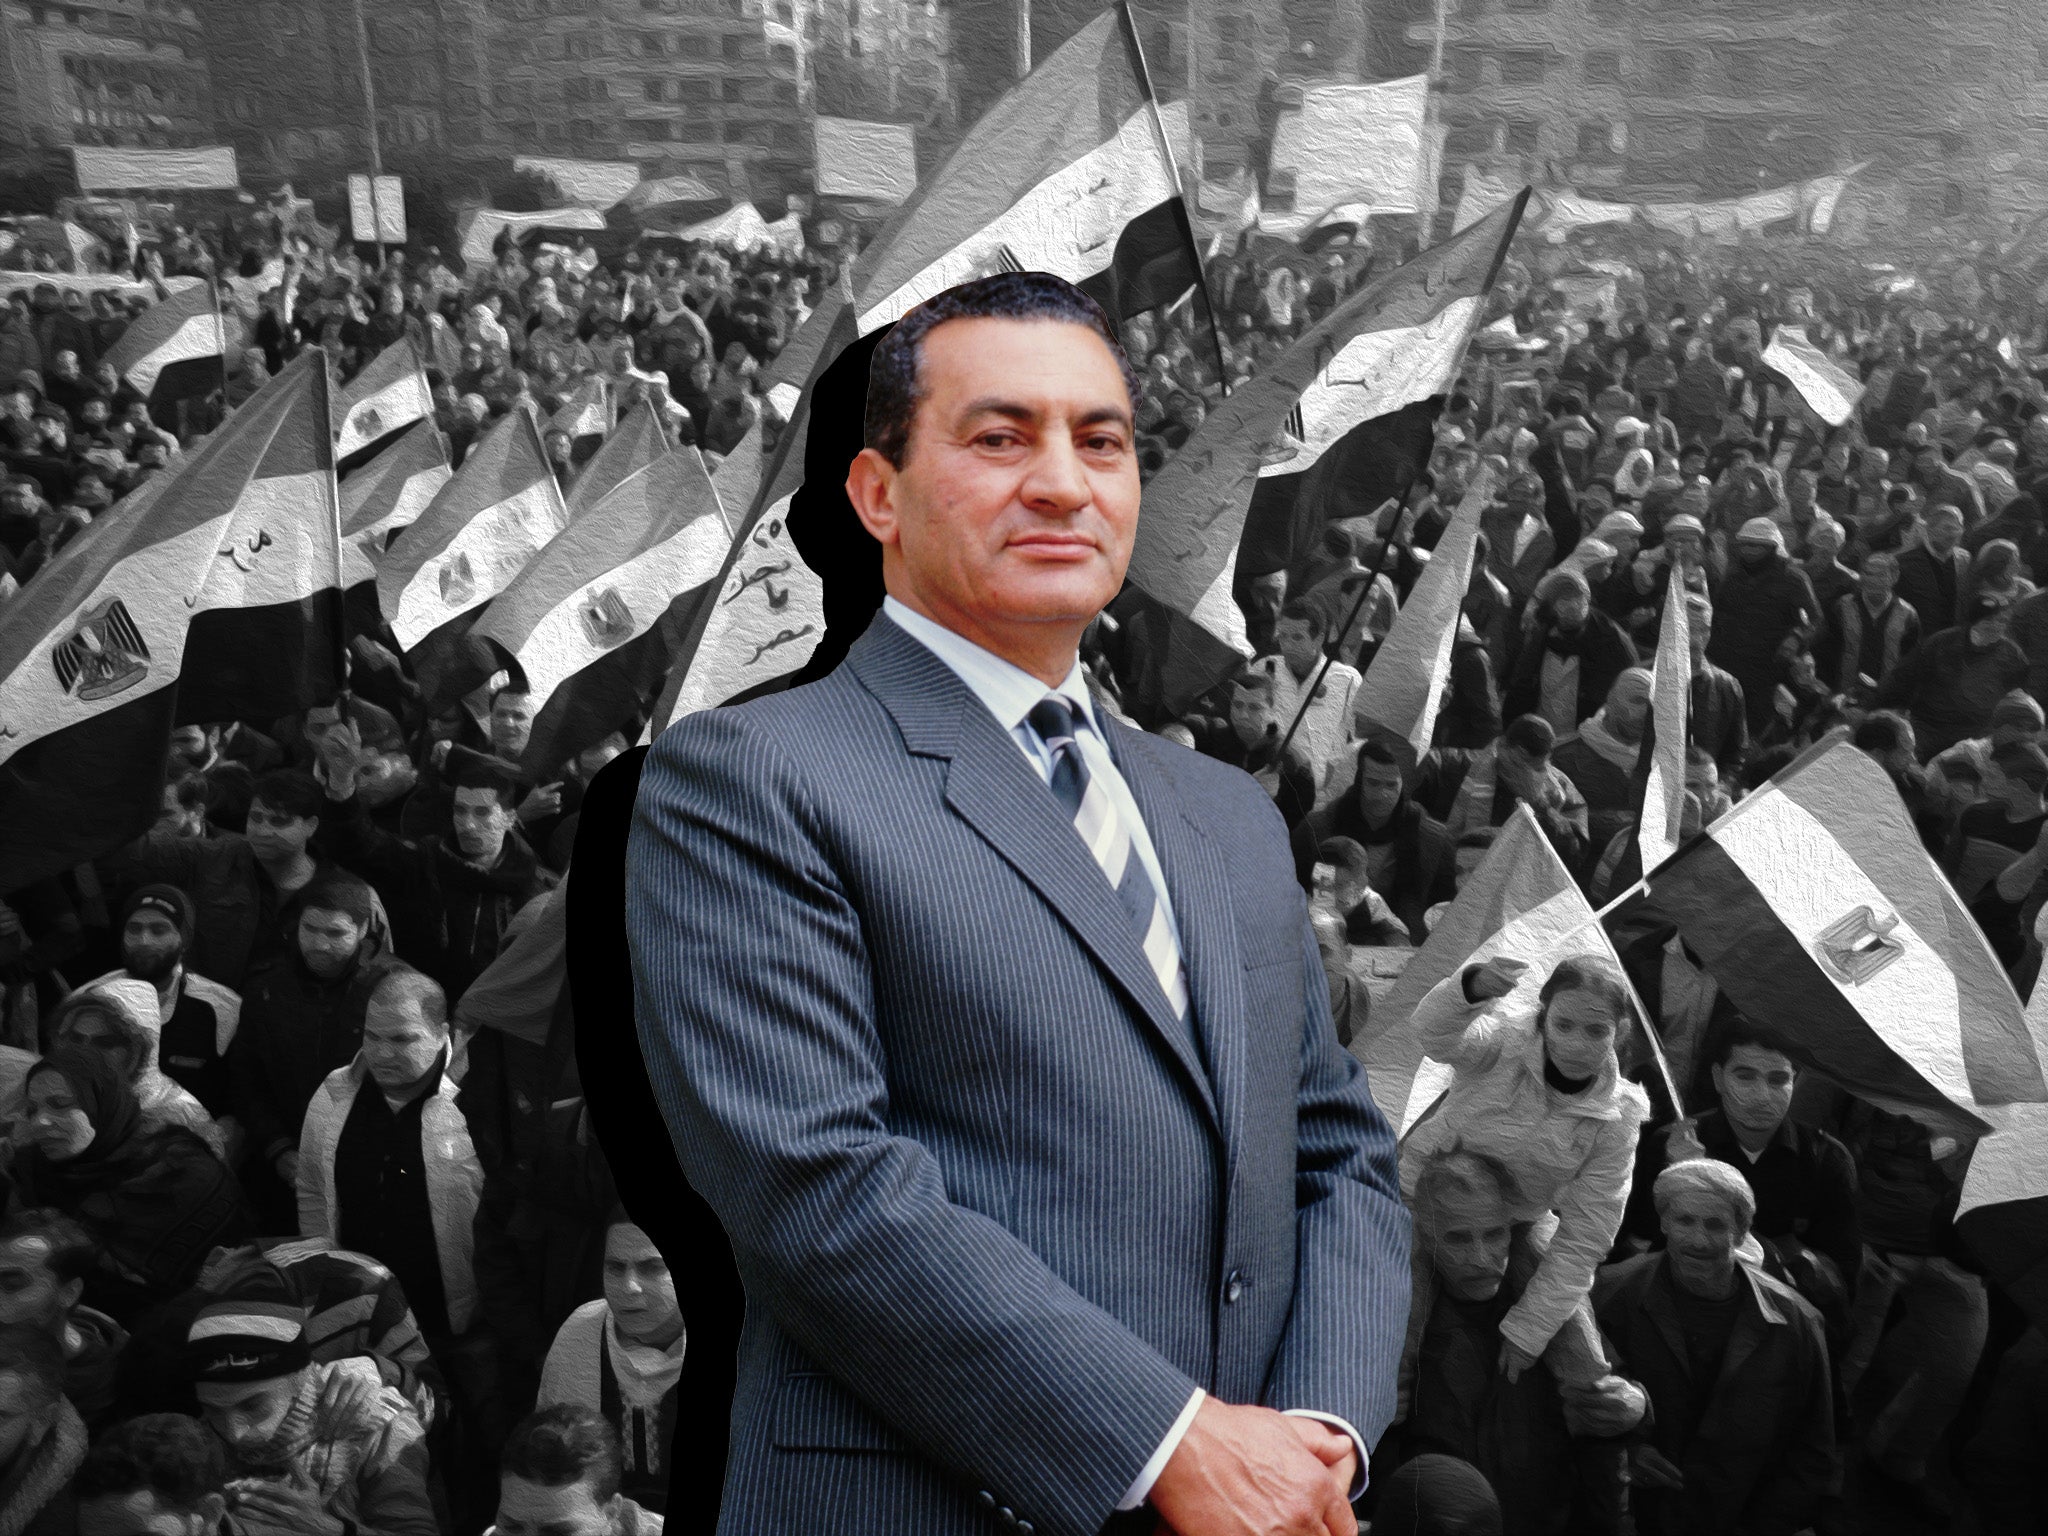 Mubarak was known for overseeing rampant corruption but also relative stability